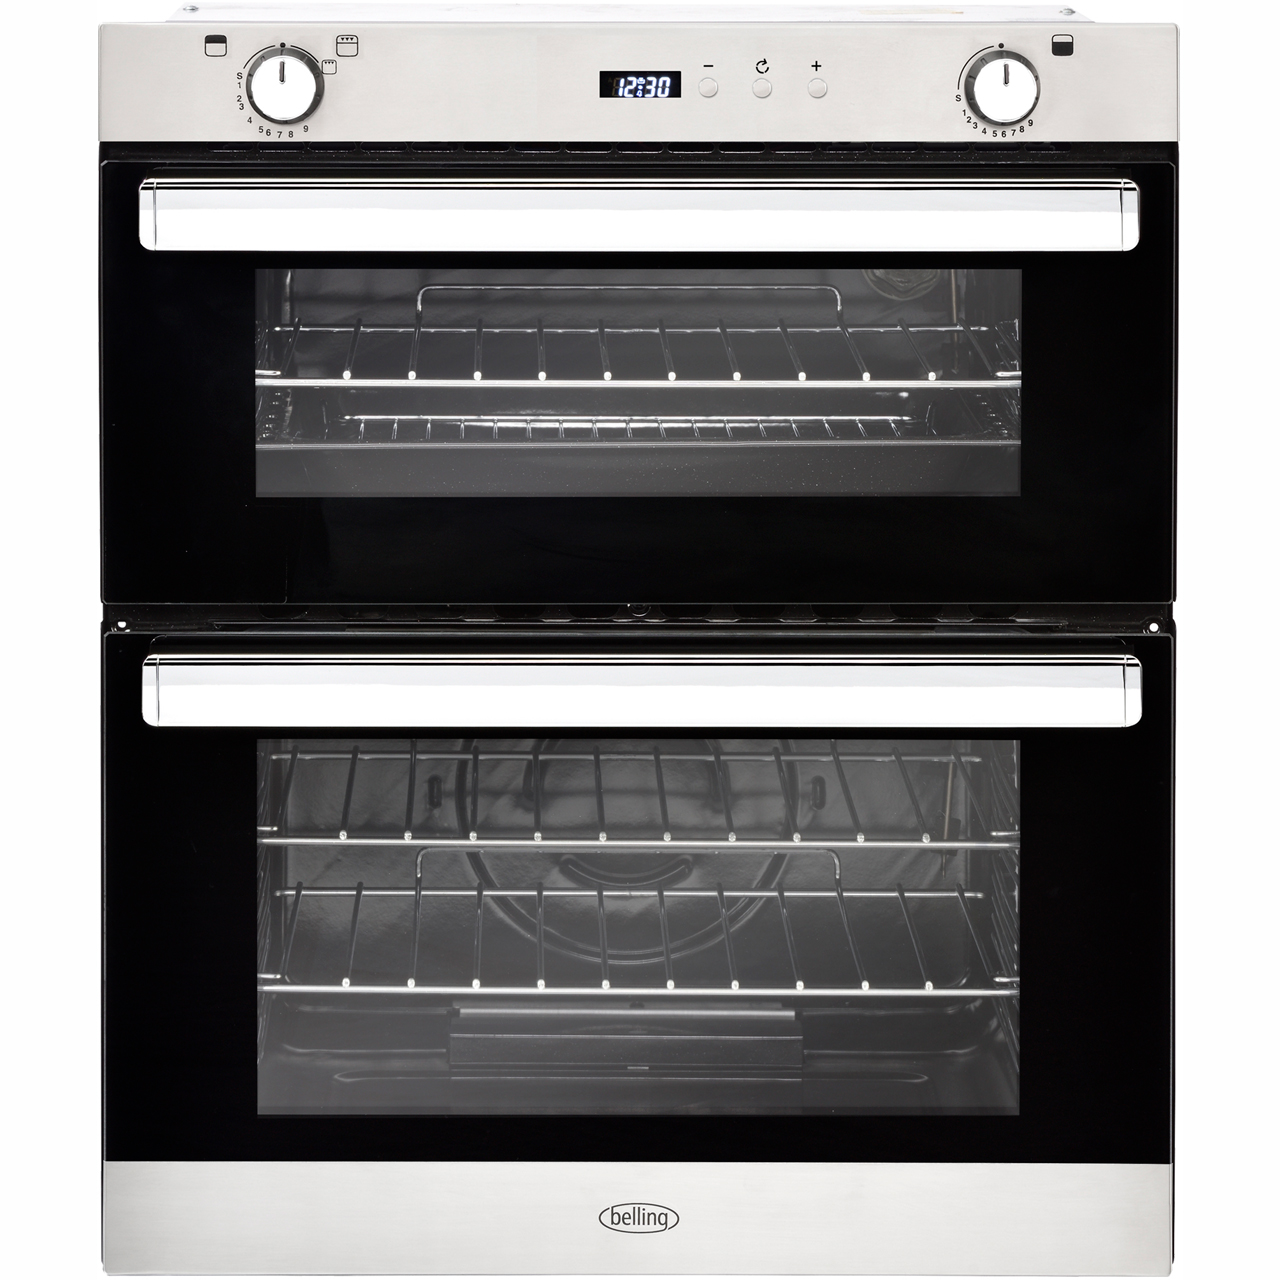 Belling BI702G Built Under Gas Double Oven with Full Width Electric Grill - Stainless Steel - A/A Rated, Stainless Steel